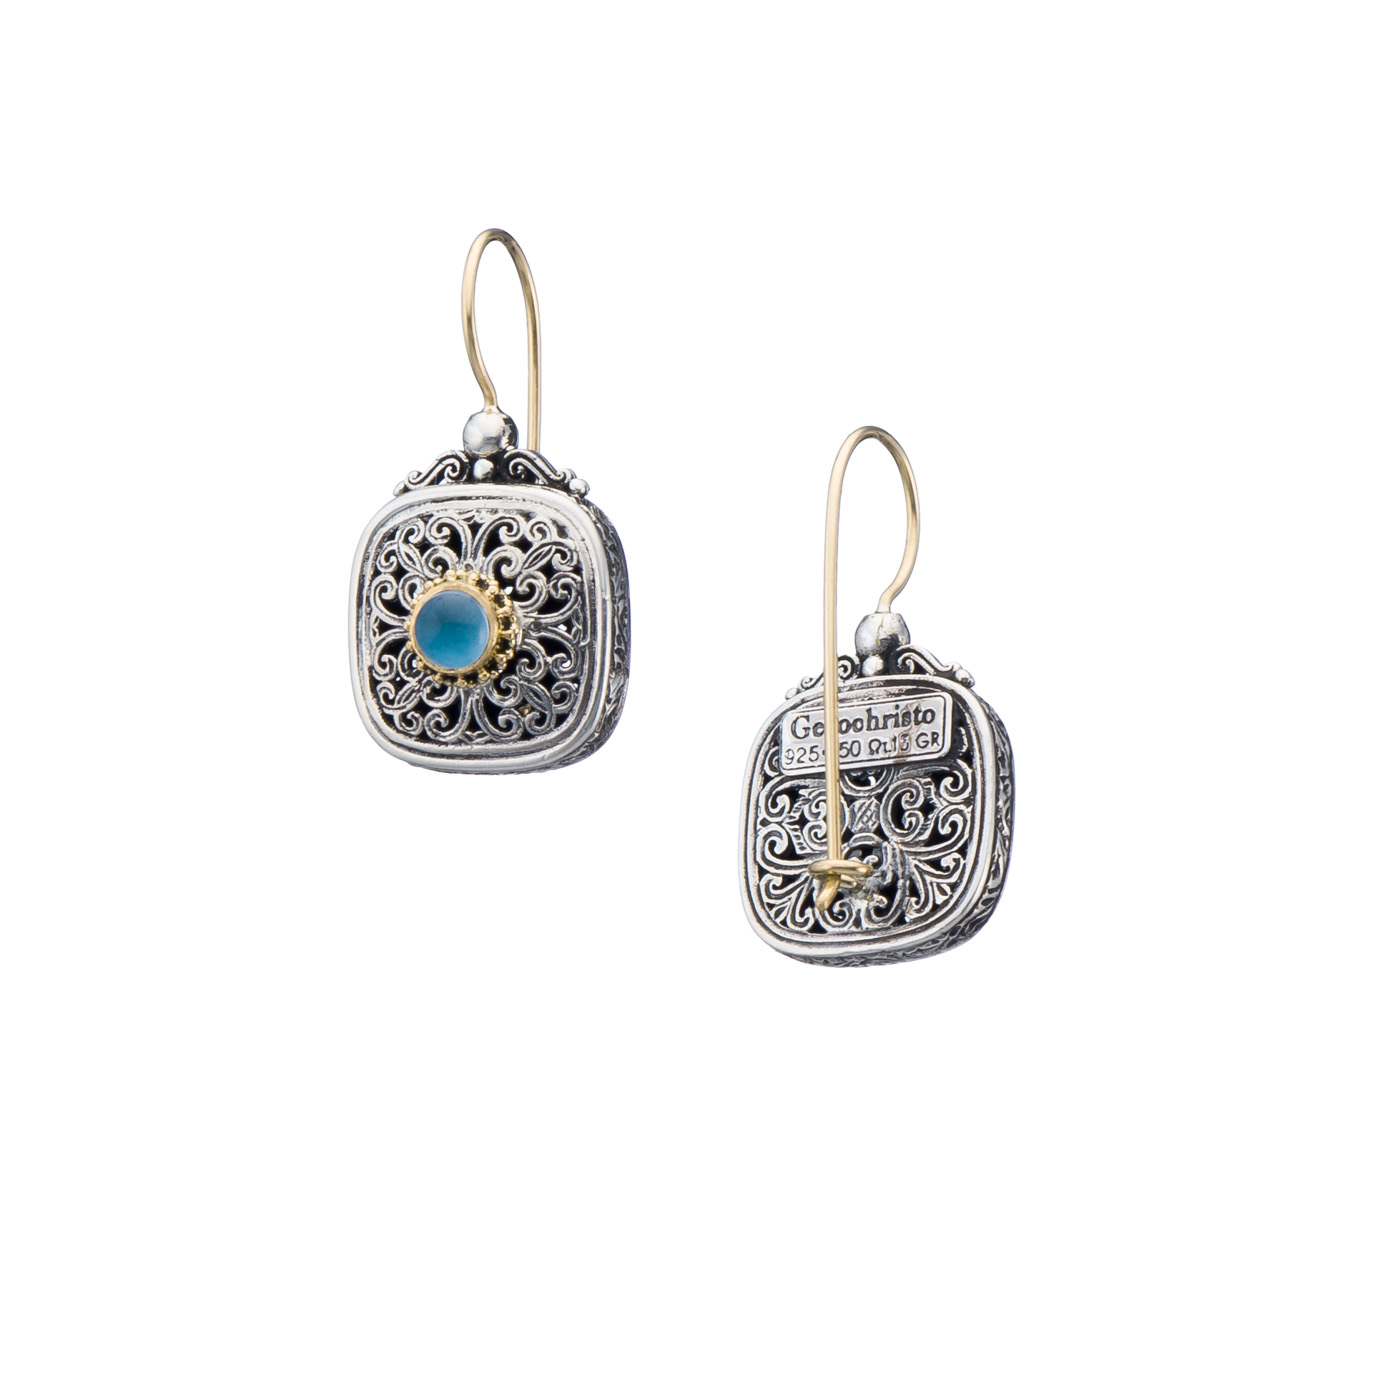 Mediterranean small square earrings in 18K Gold and sterling silver with aqua spinel